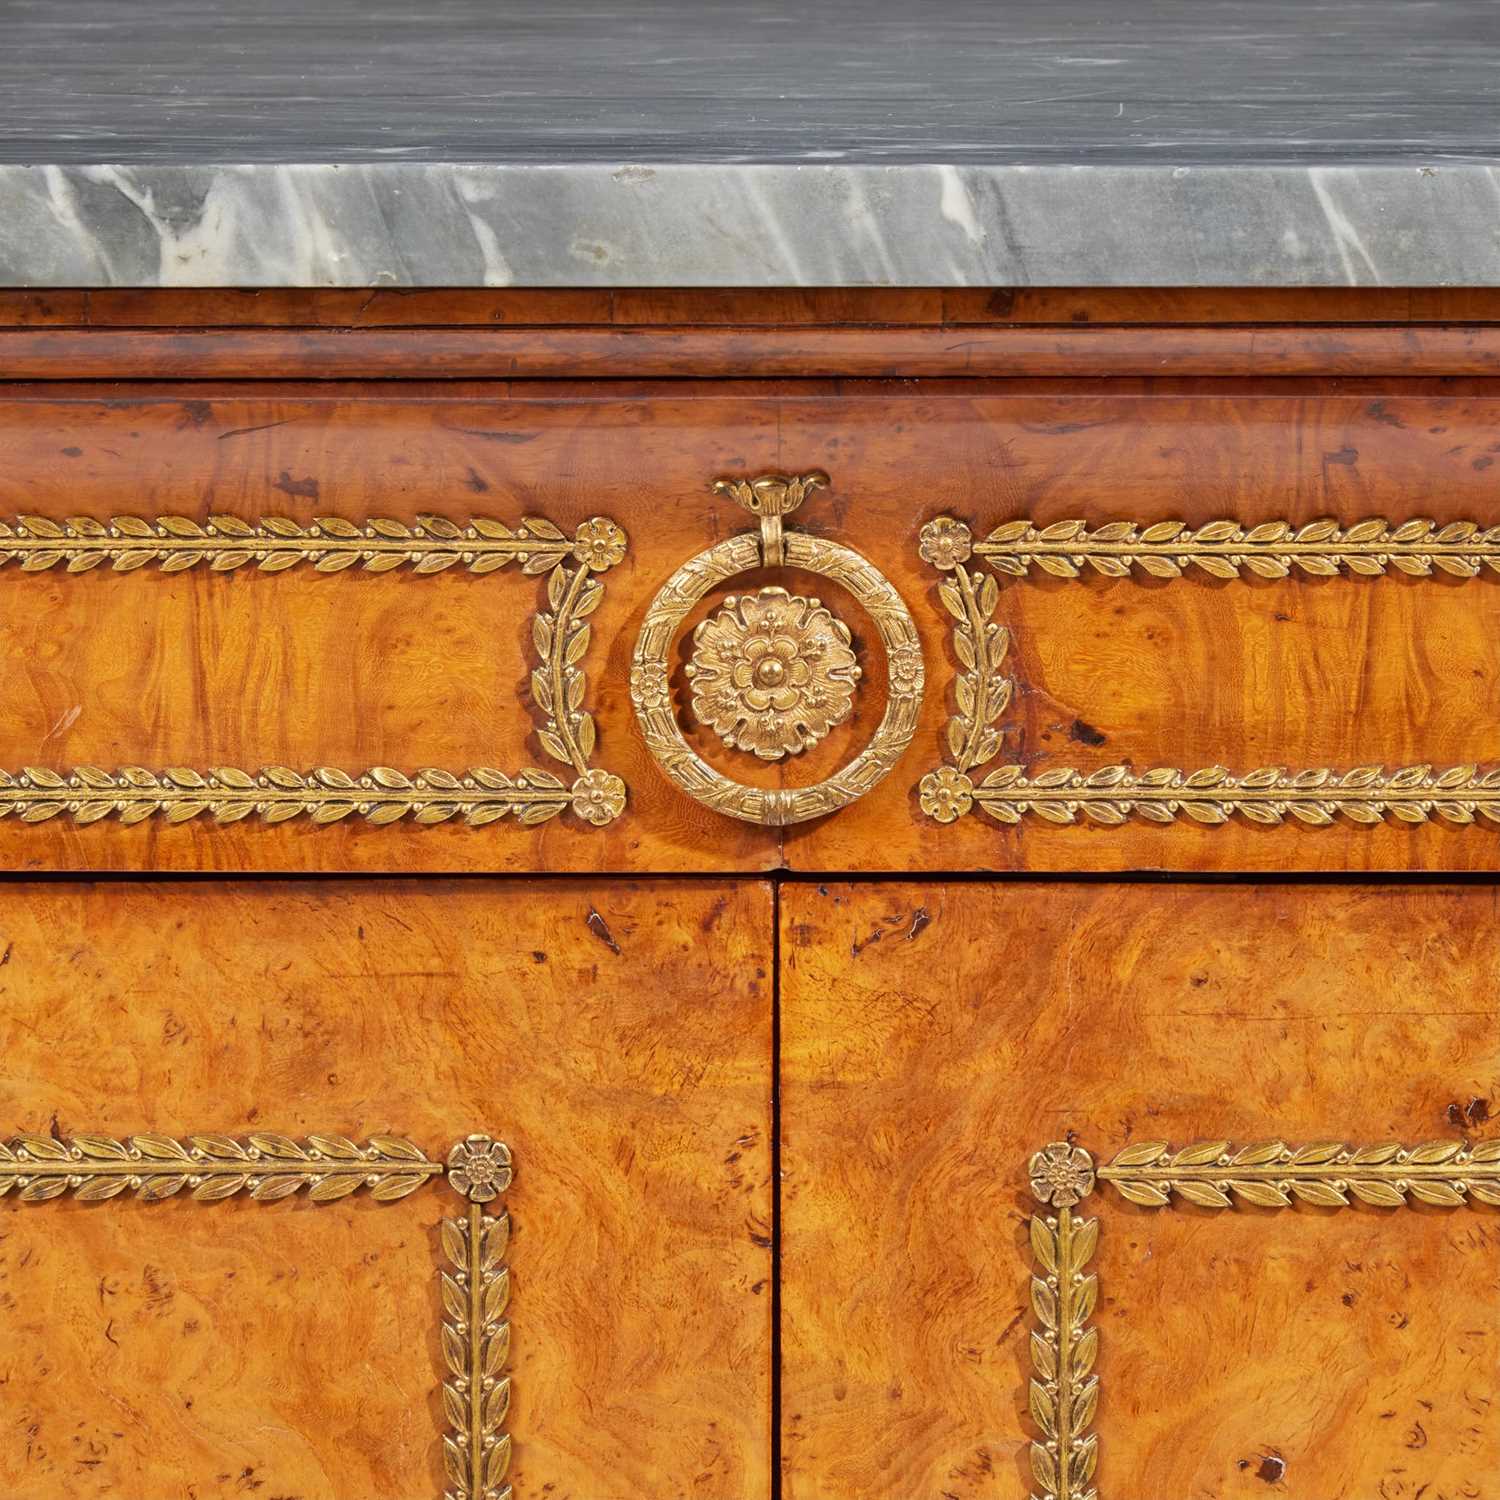 A Charles X gilt bronze-mounted pollard oak side cabinet with Saint Anne marble top circa 1820 - Image 2 of 3